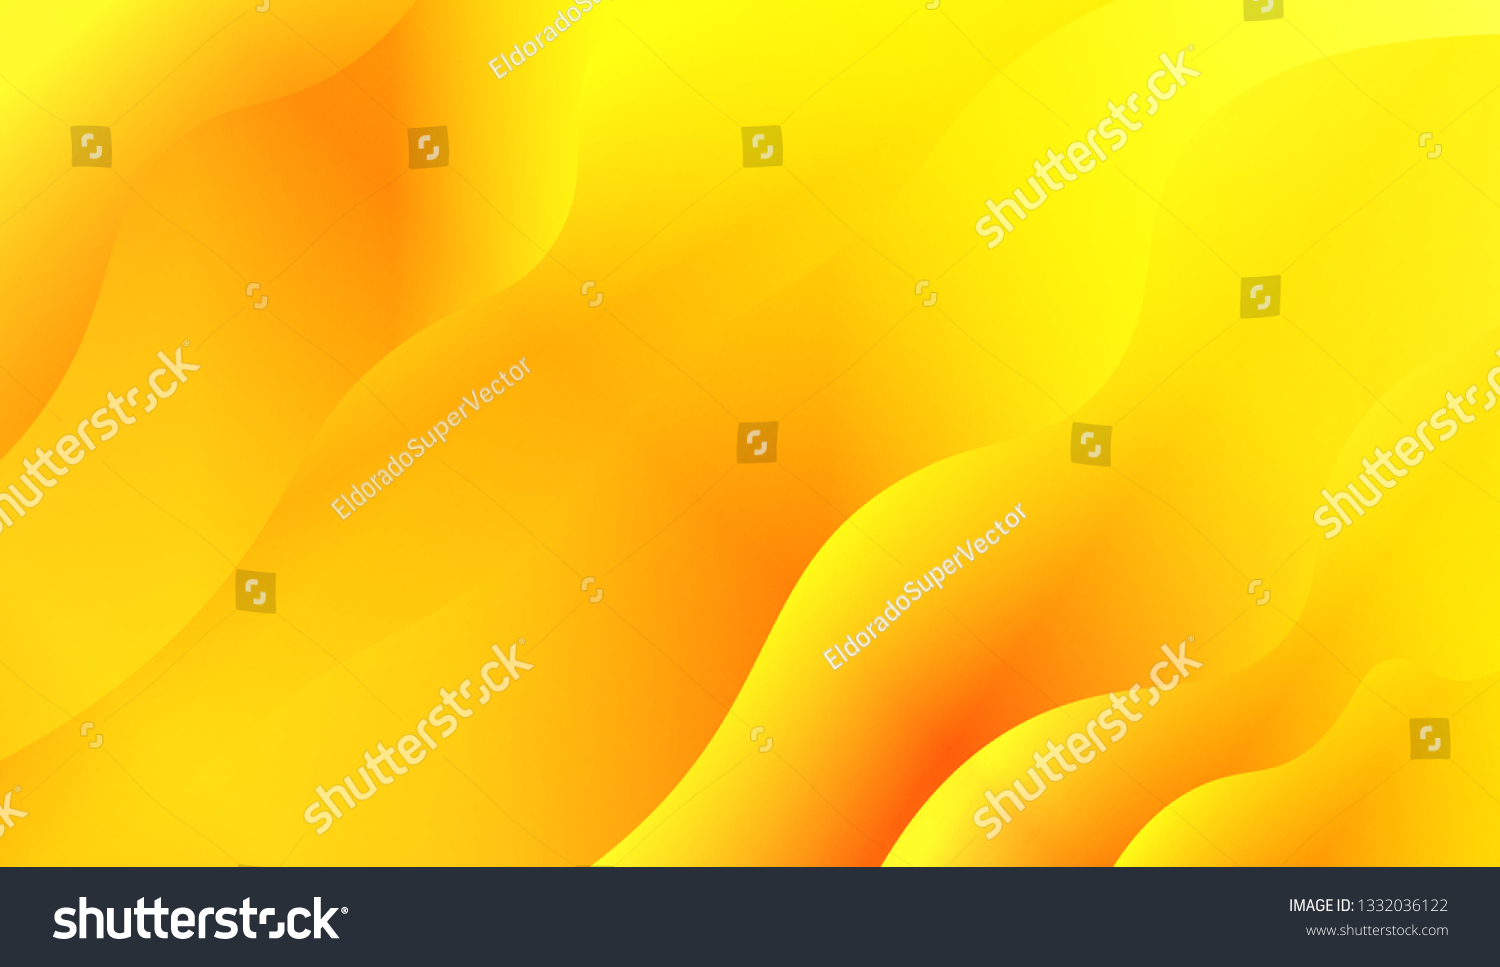 Abstract Background Swirly Colorful Vibrant Shapes Vector